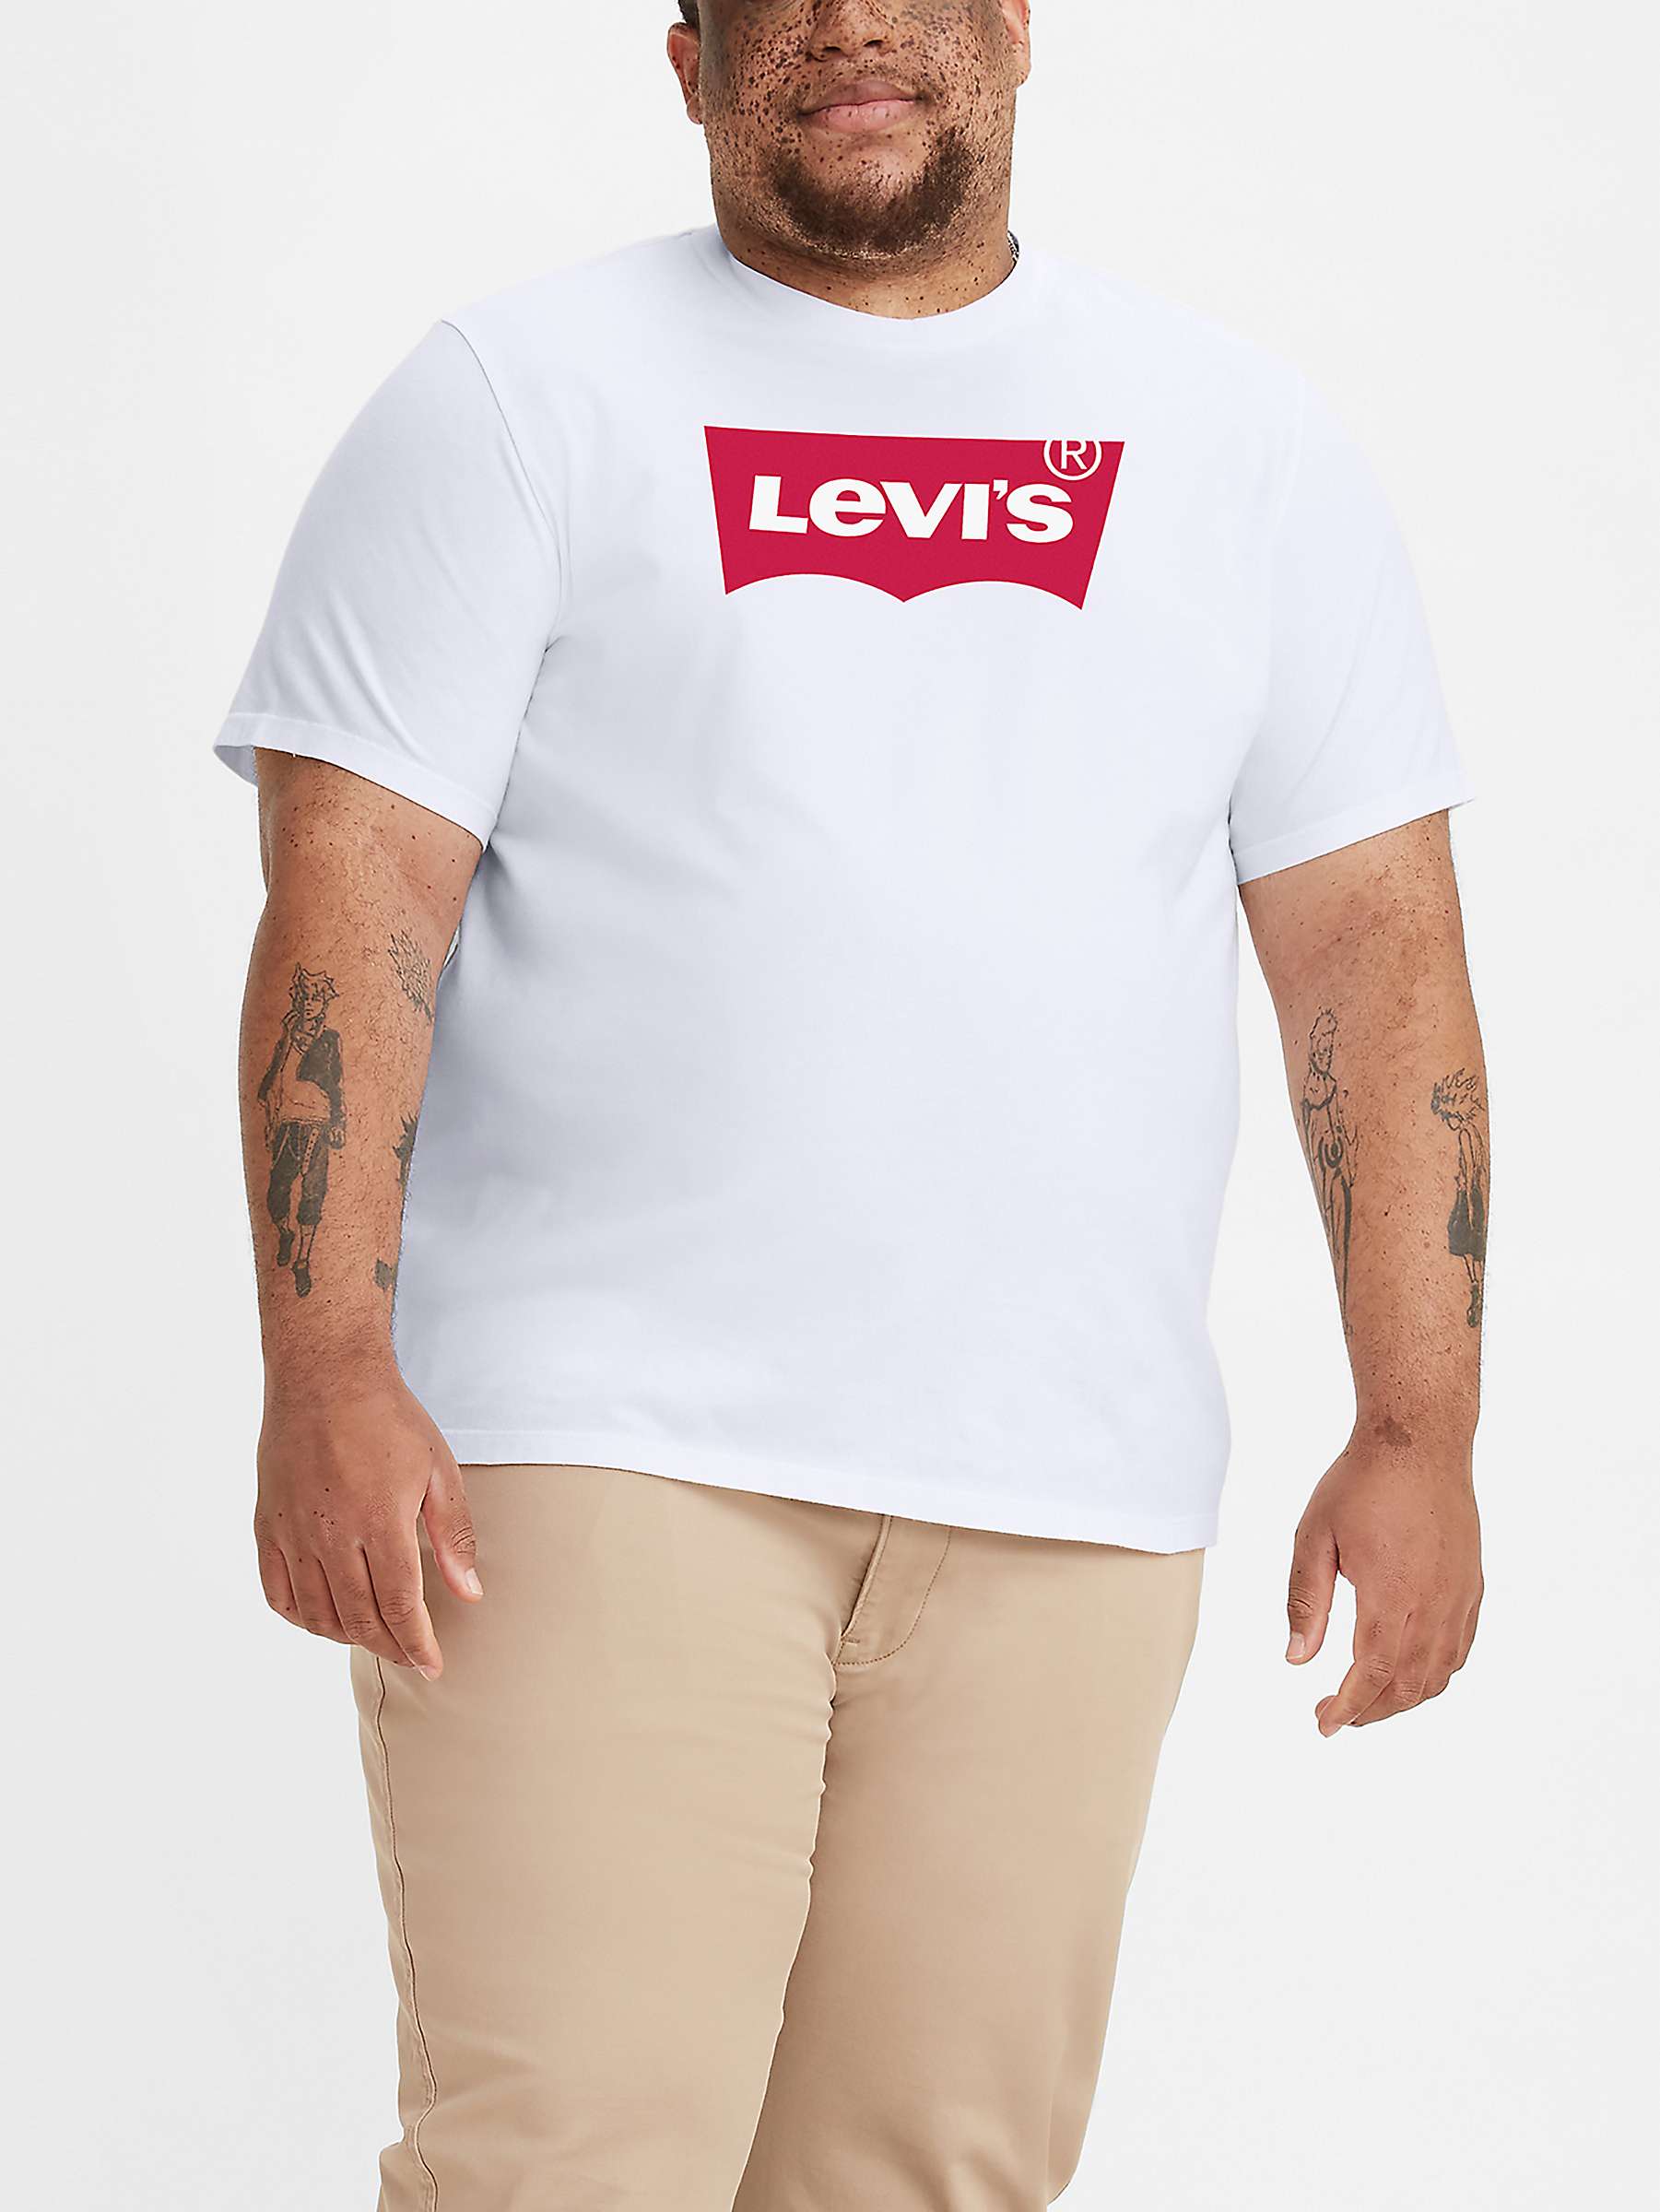 Buy Levi's Batwing Big & Tall Graphic Logo T-Shirt, White Online at johnlewis.com